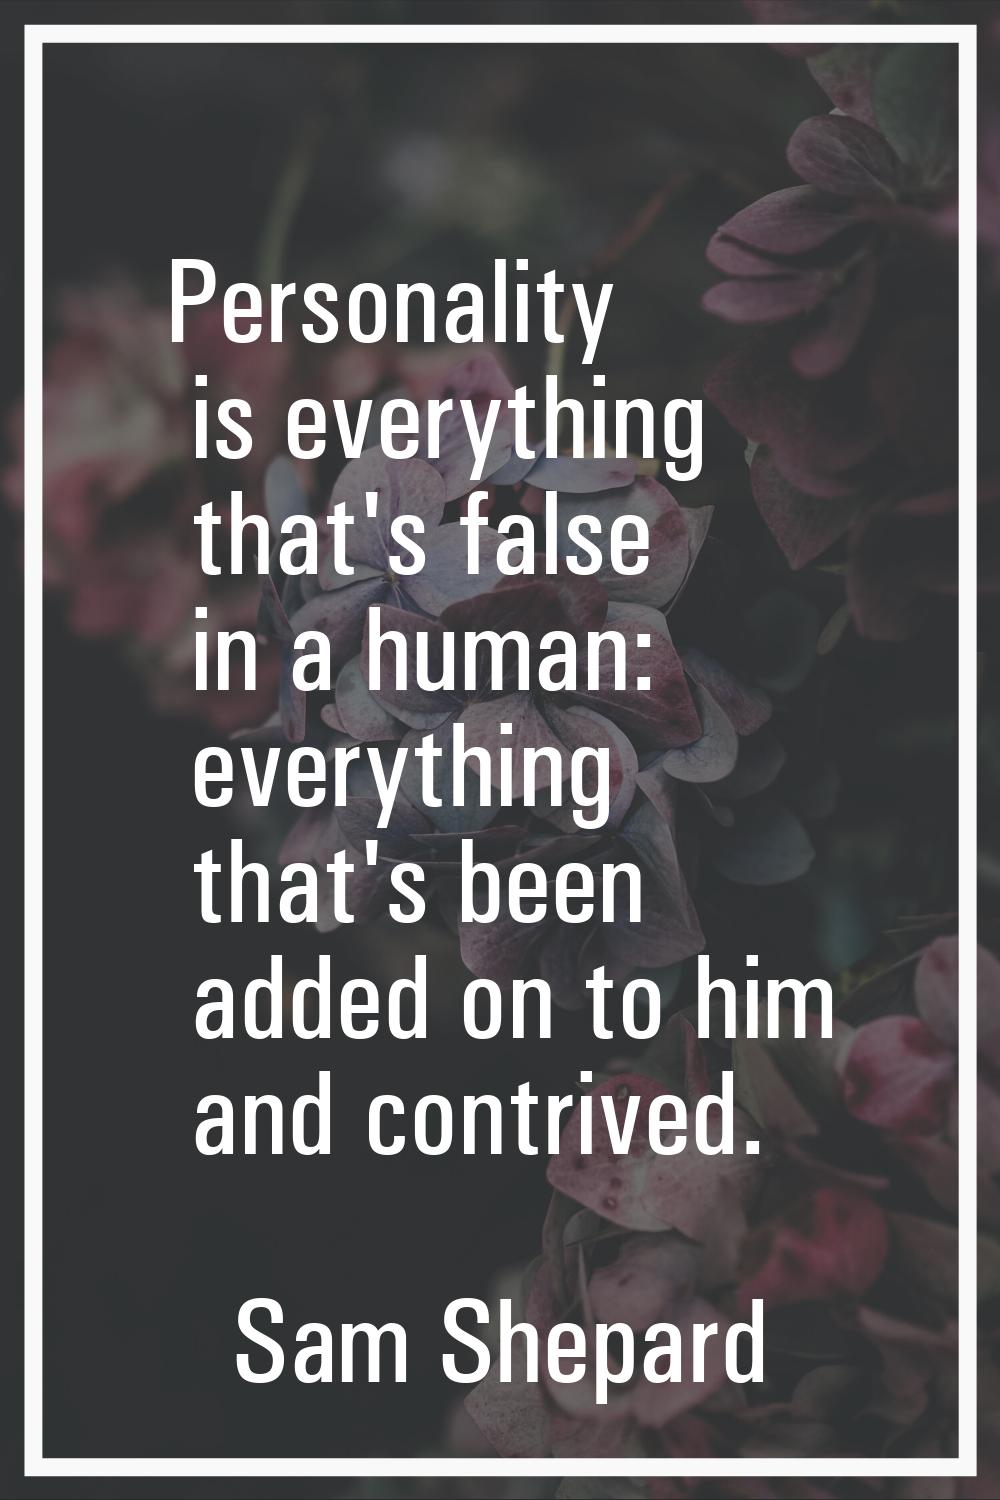 Personality is everything that's false in a human: everything that's been added on to him and contr